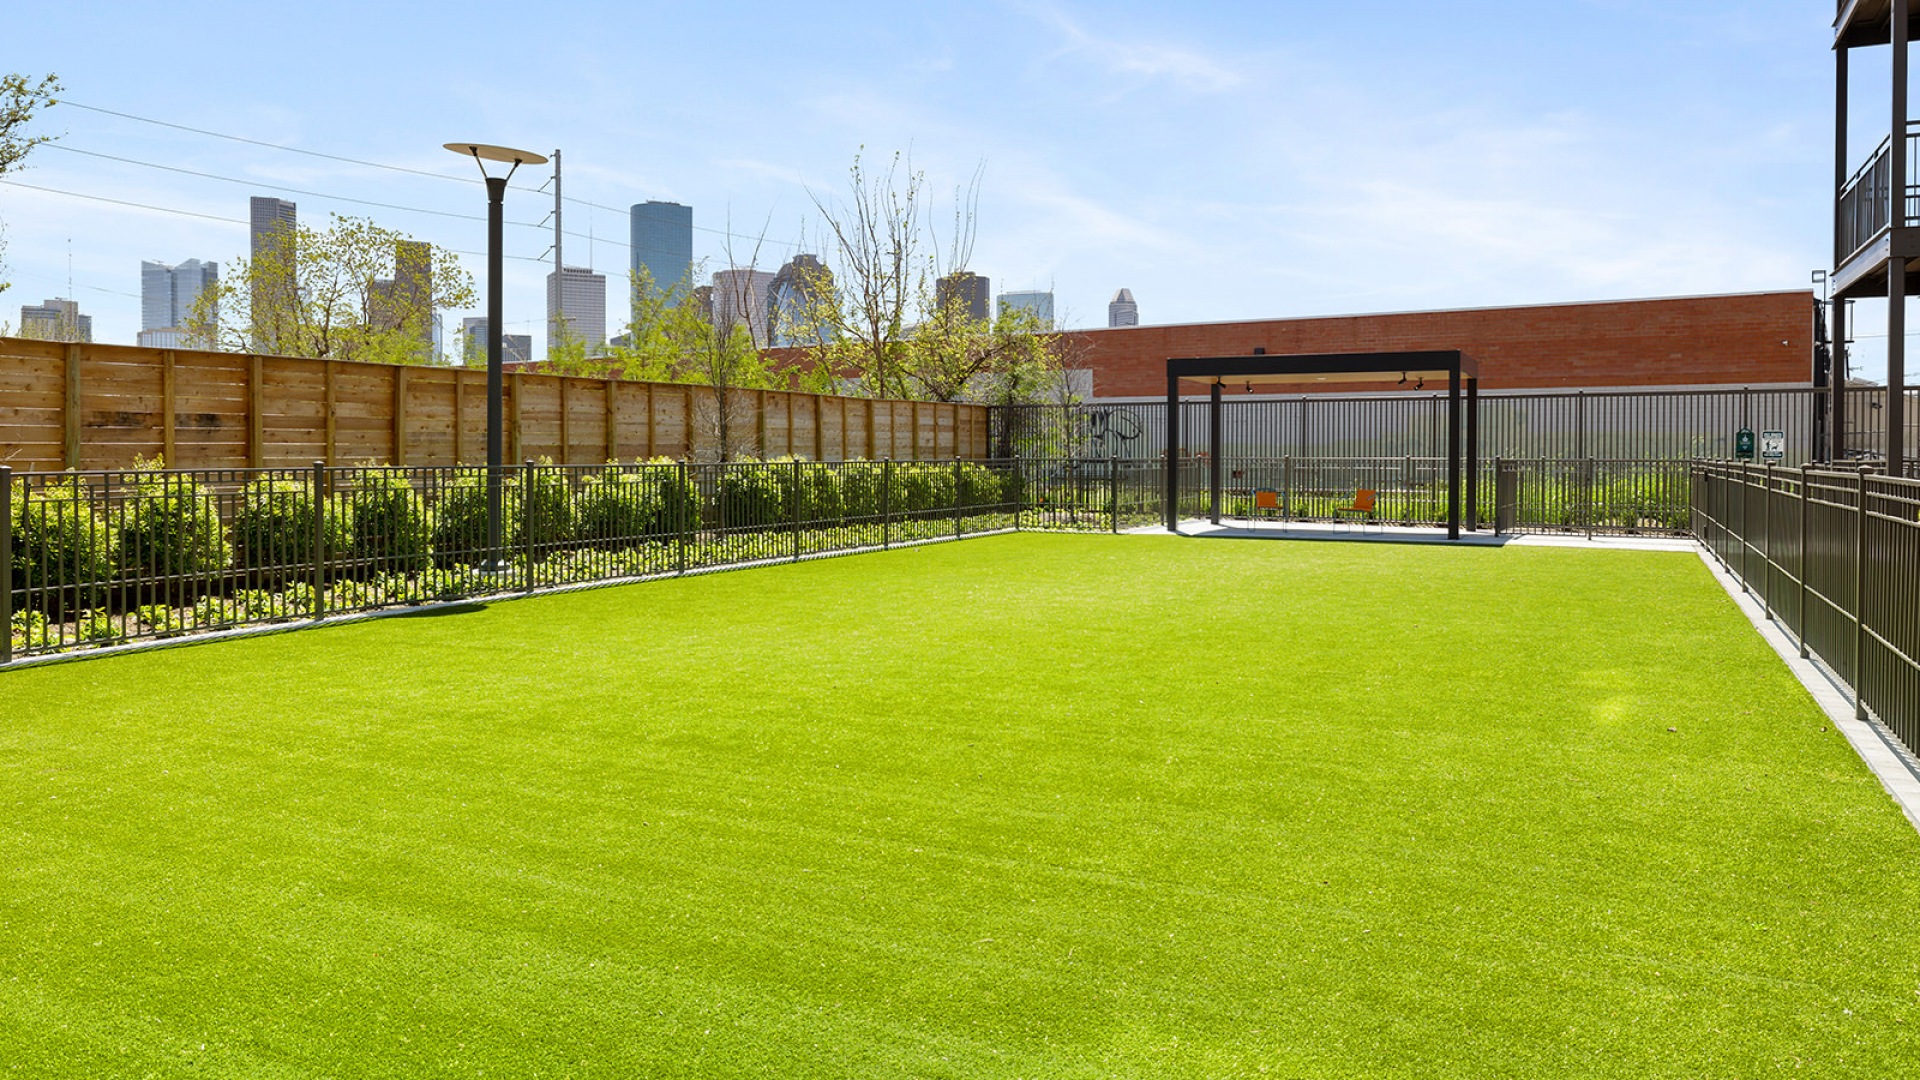 The pet park at our apartments in Houston, featuring a large astroturf area contained by a black fence.